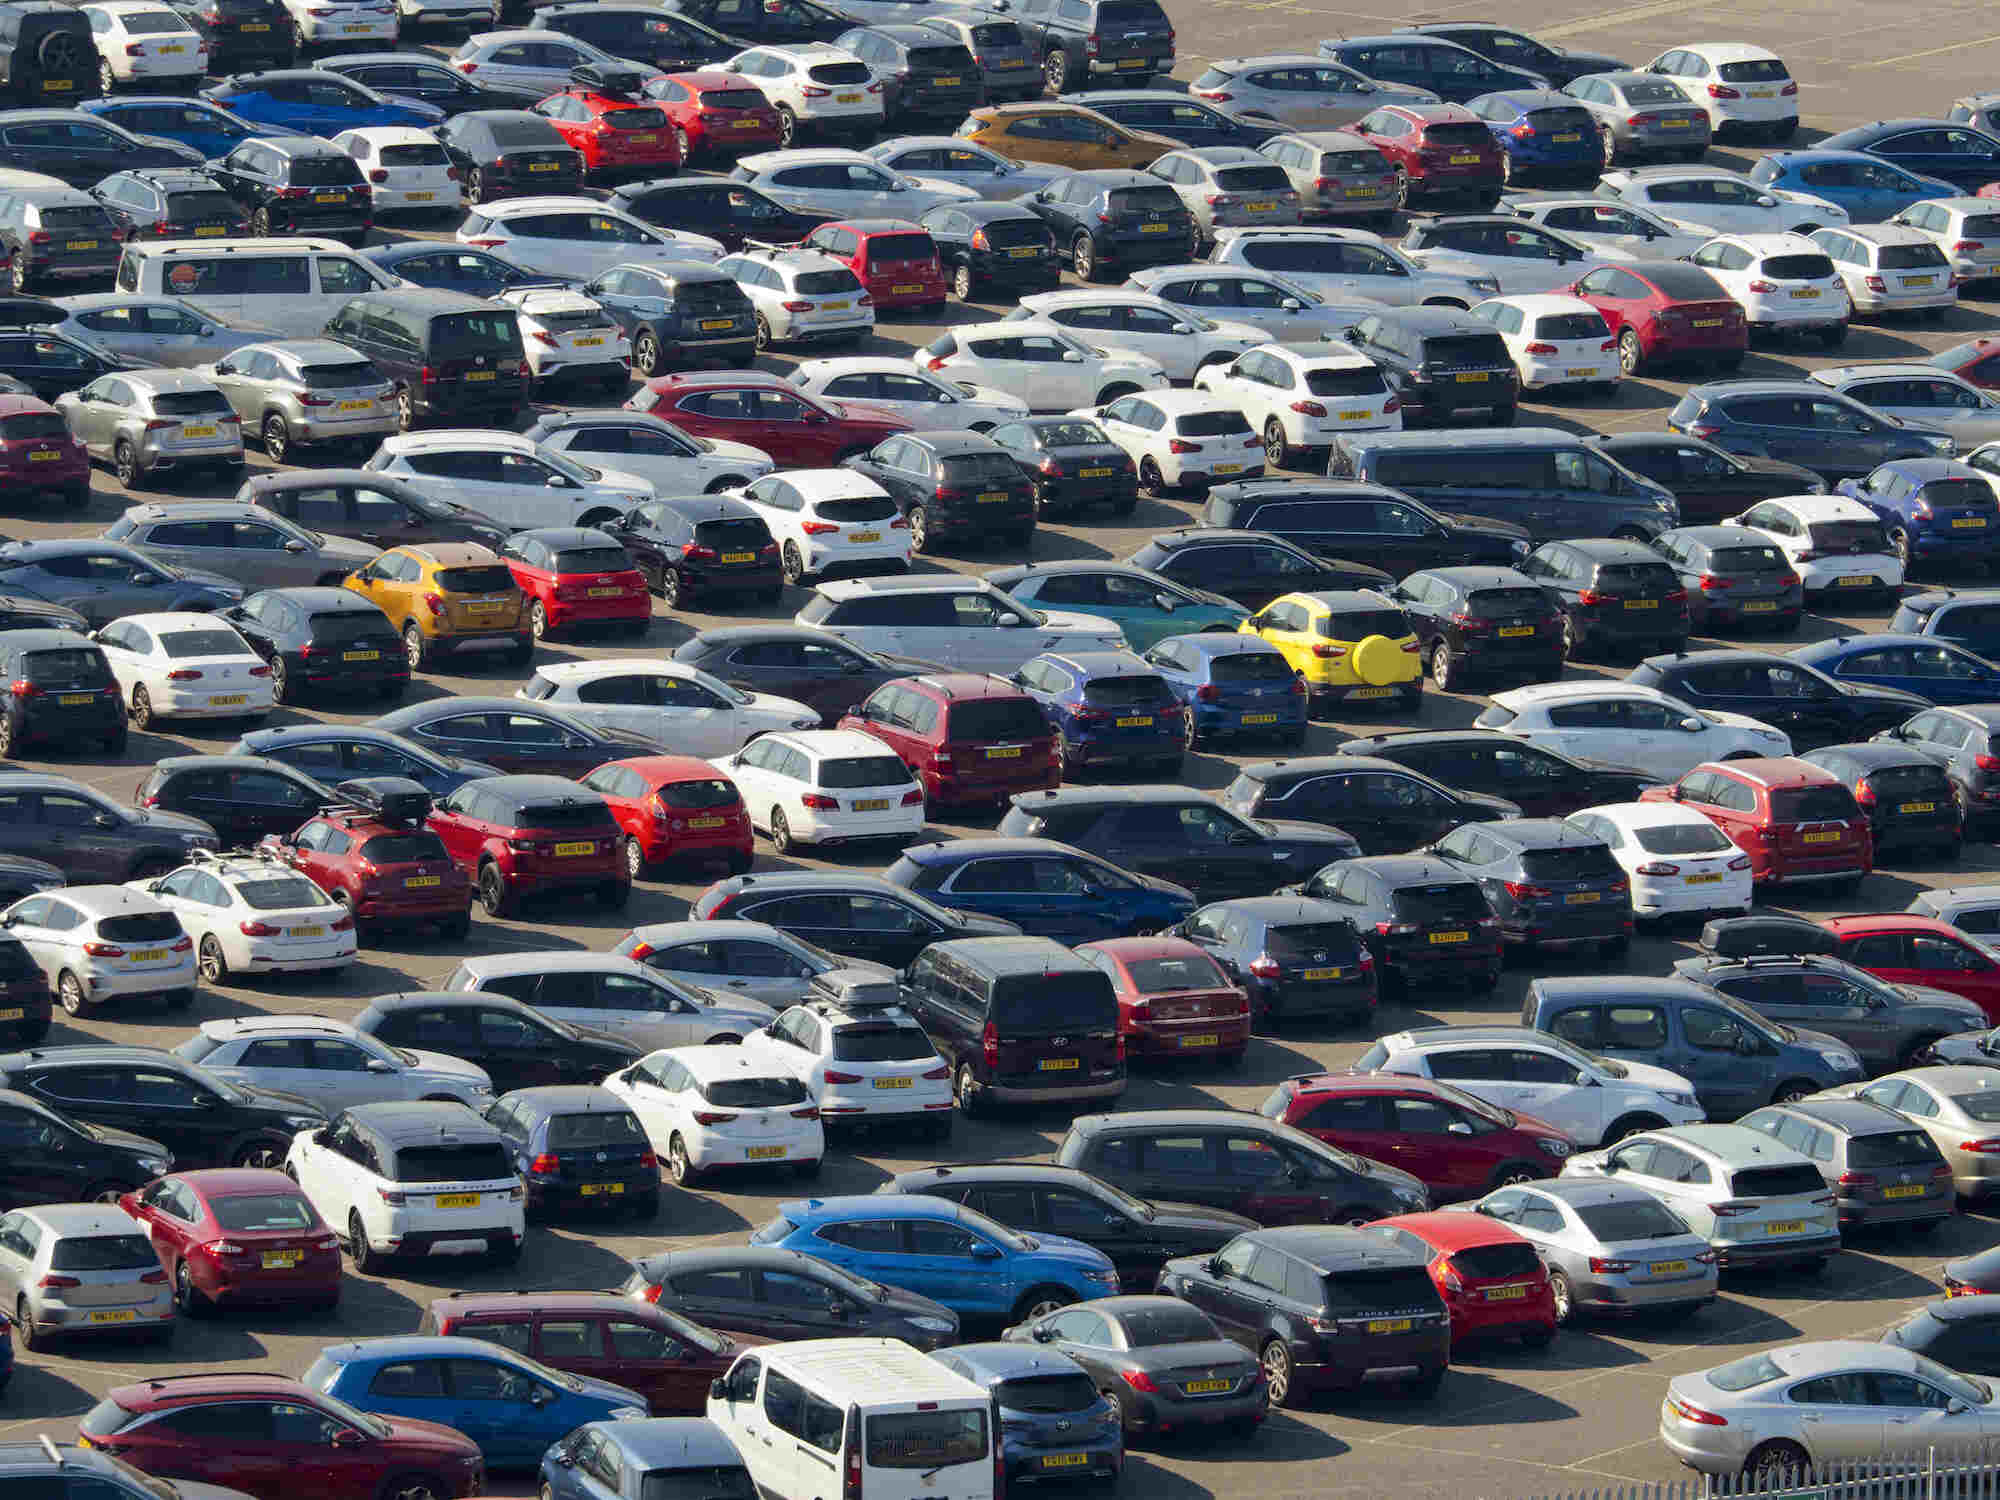 A parking lot full of cars